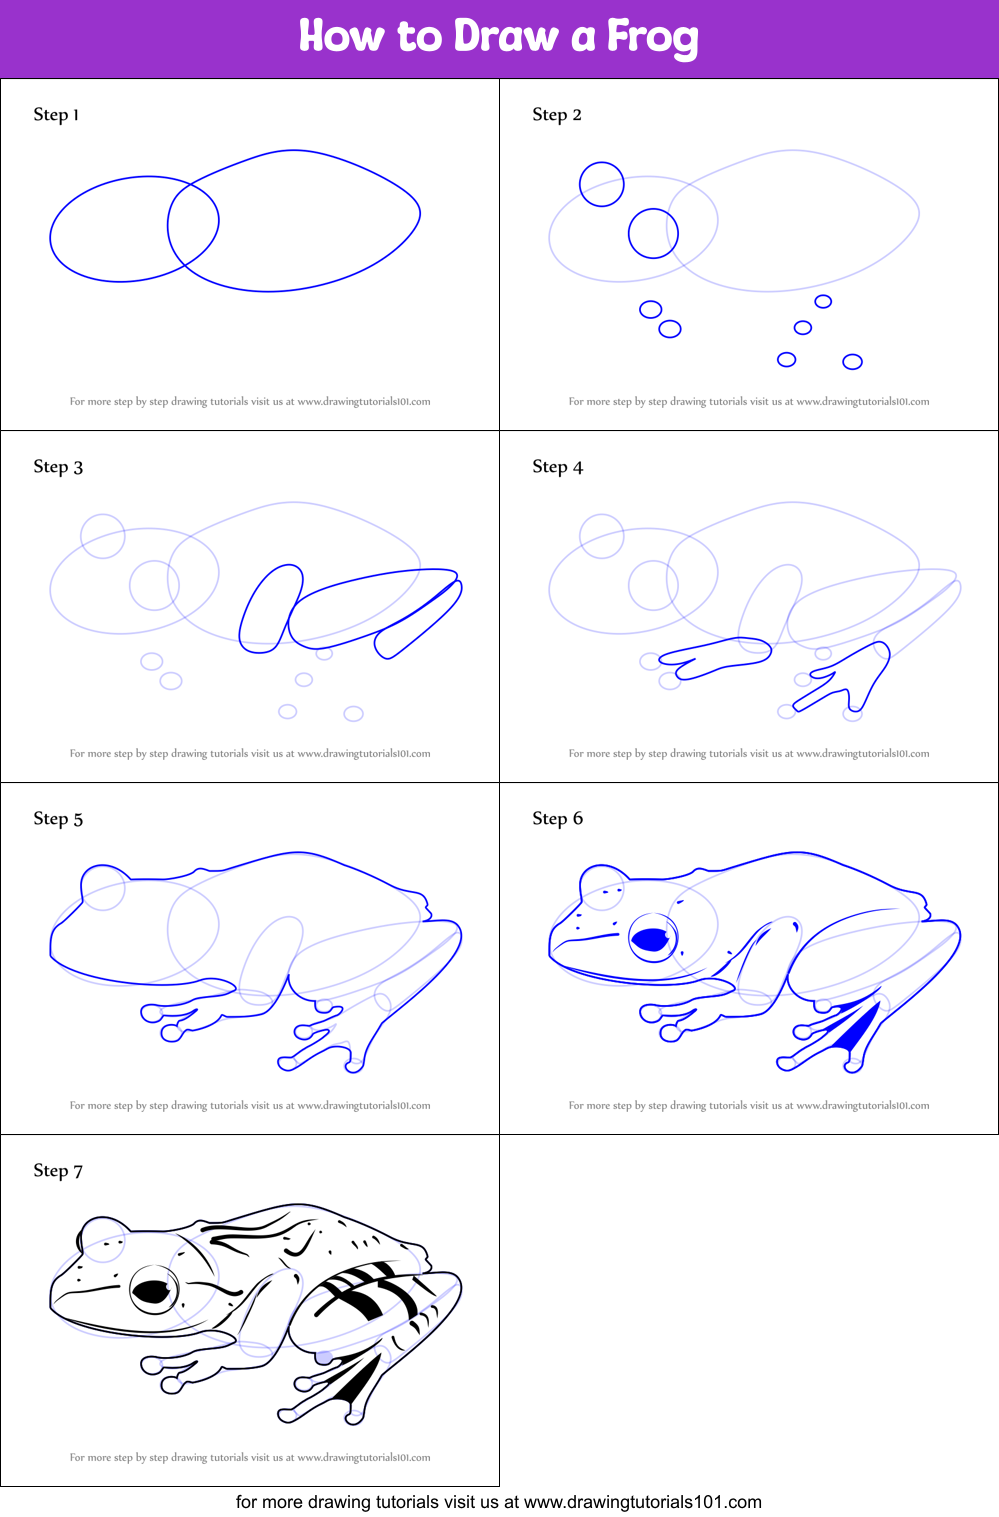 How to Draw a Frog printable step by step drawing sheet